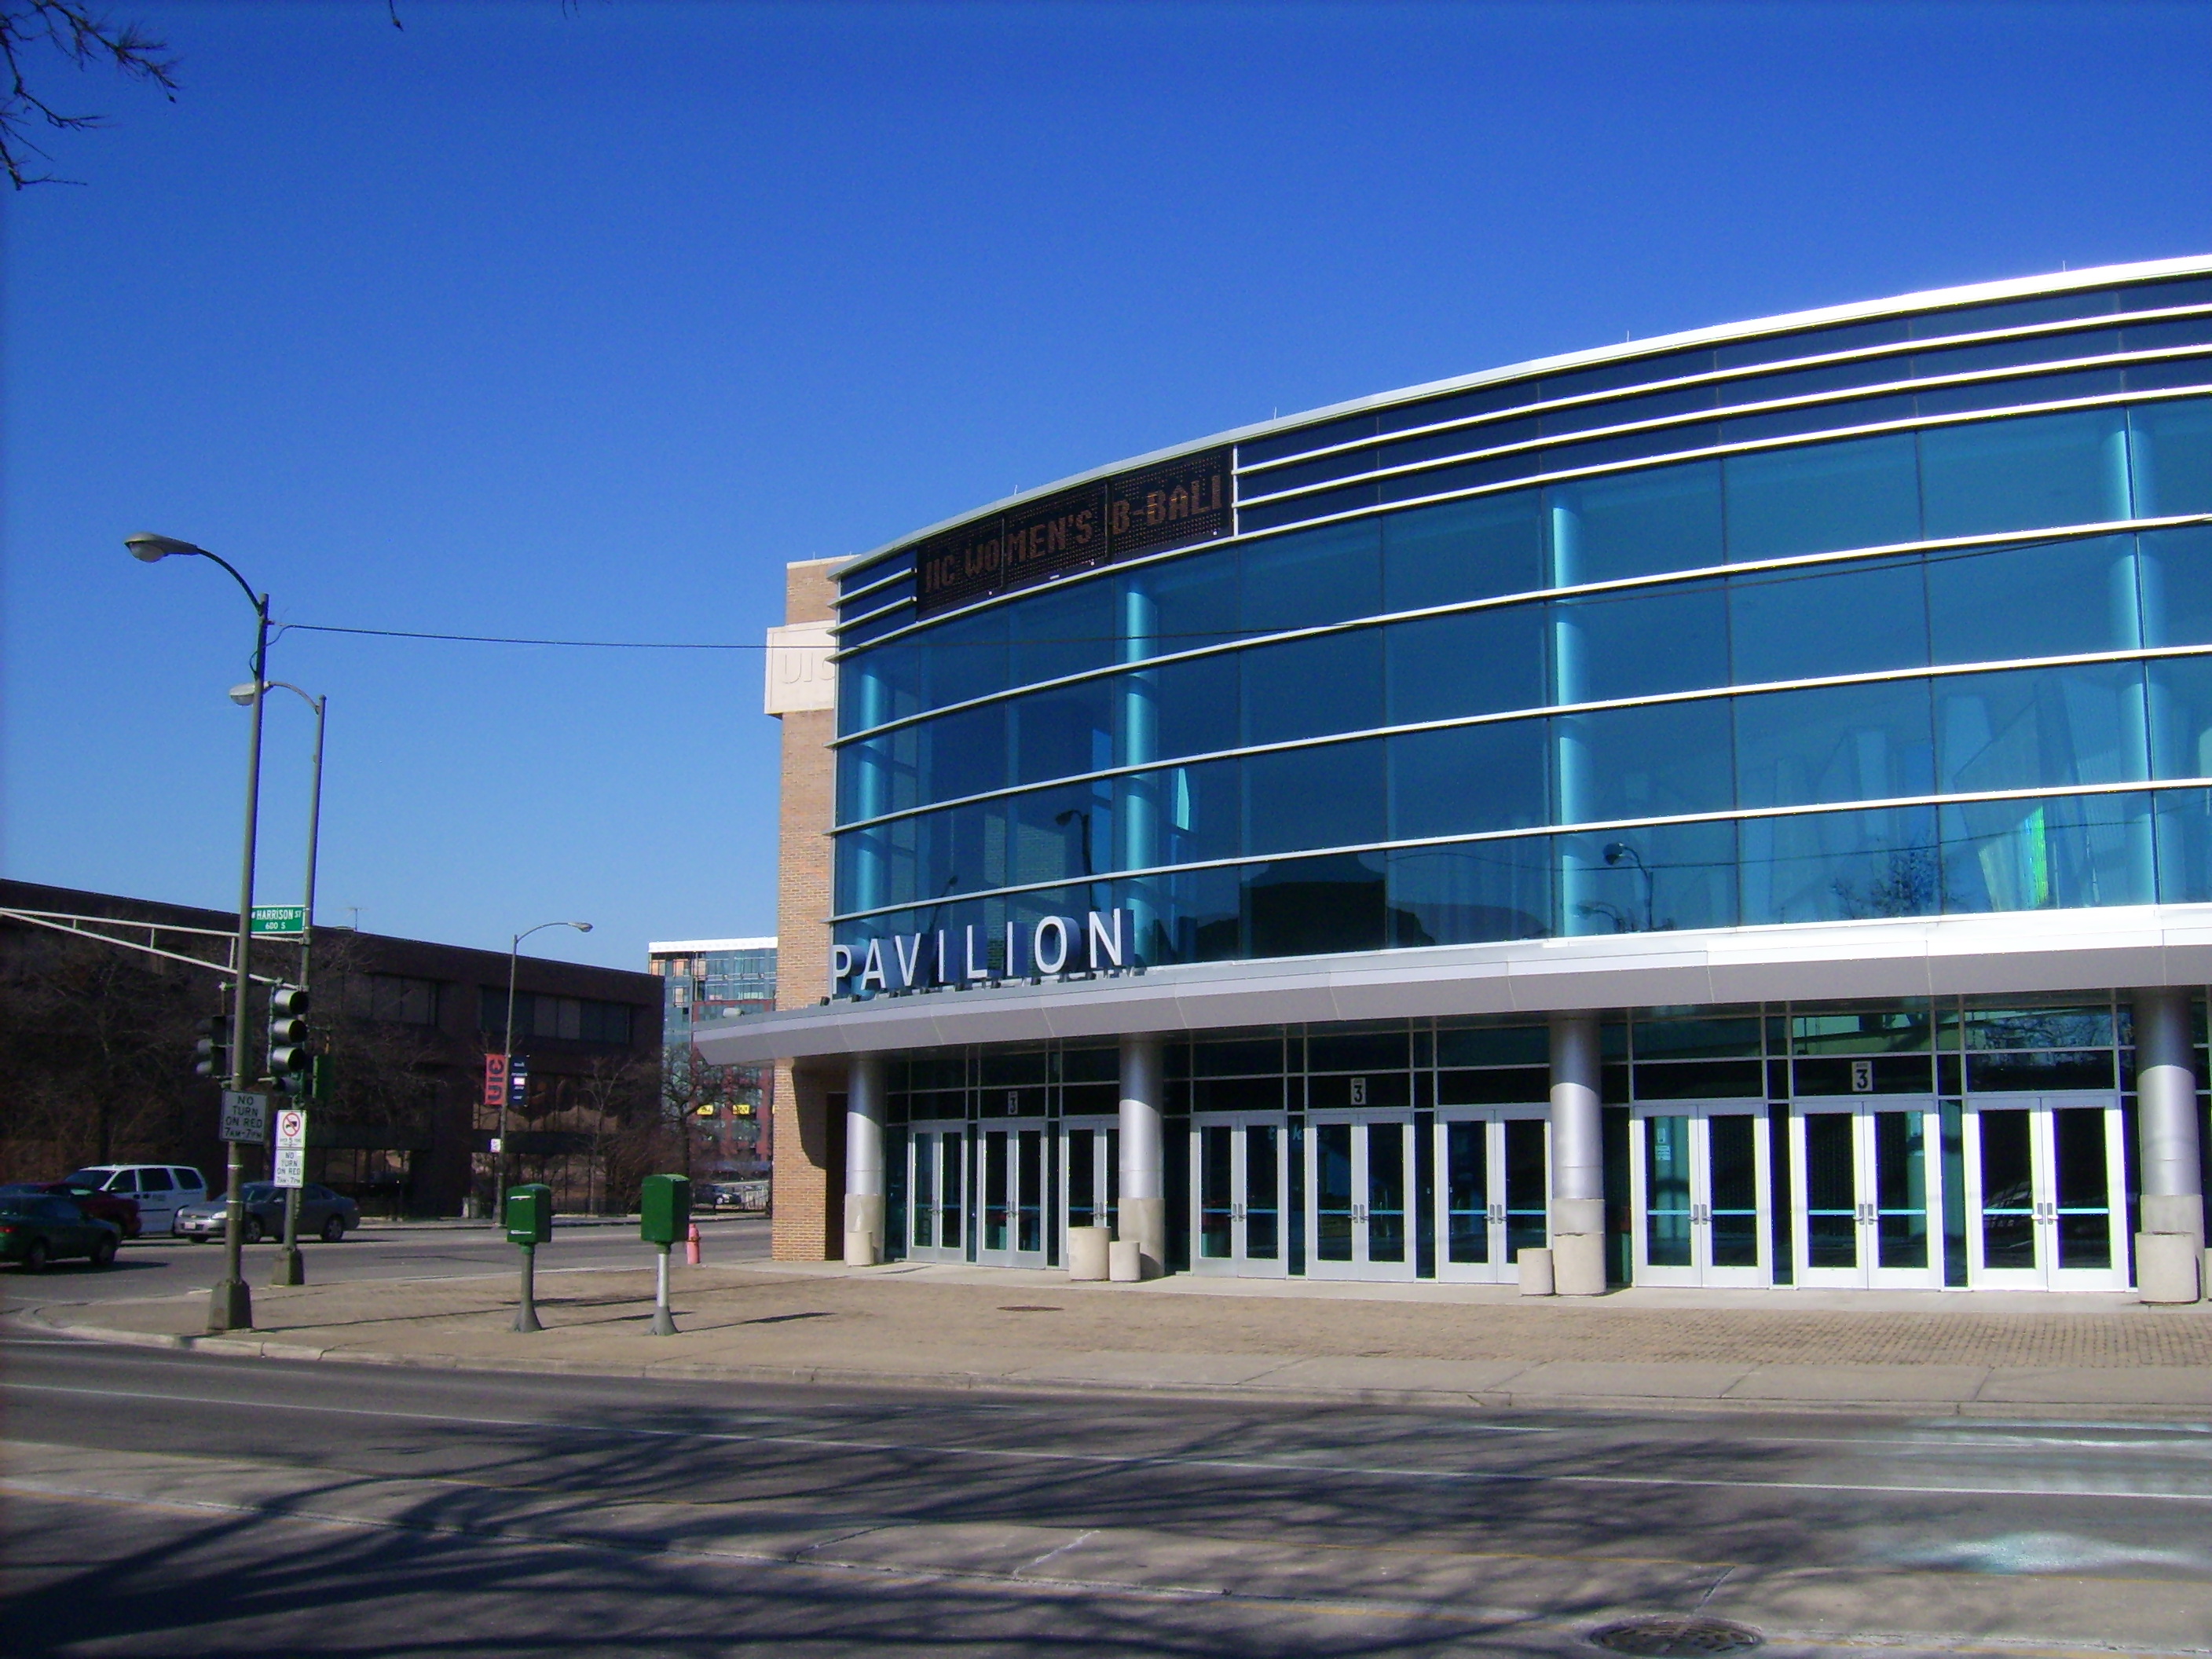 Credit Union 1 Arena at UIC - Chicago | Tickets, Schedule, Seating